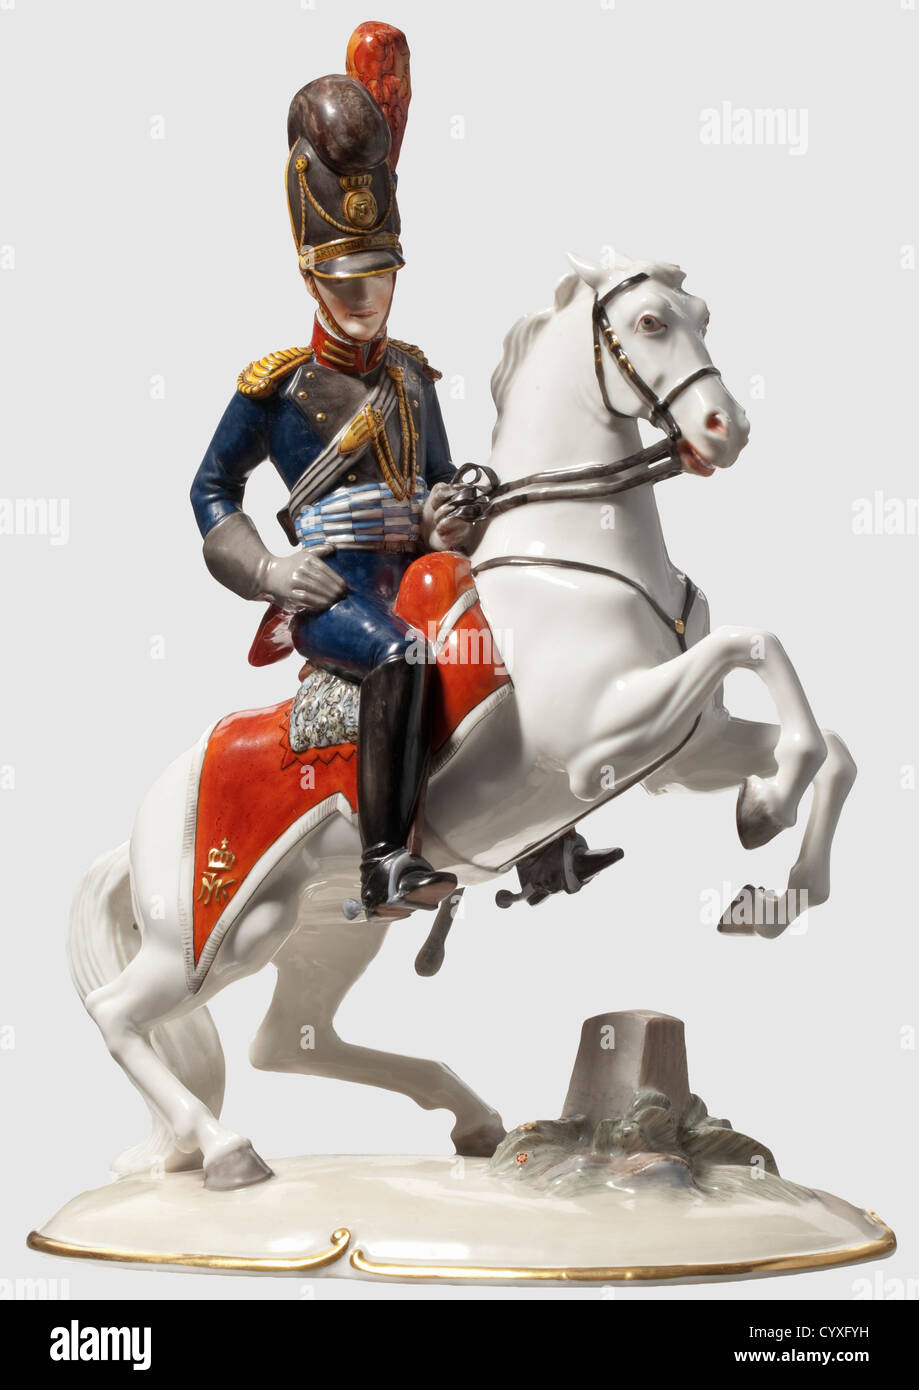 An artillery officer on horseback,of the Bavarian army in the 1st quarter of the 19th century Polychrome porcelain figure of the Nymphenburg Manufacture,after 1900. Green crowned underglaze mark at bottom and model number 776. Rearing horse with officer in blue-red uniform,tall helmet and detailed equipment. Monogram "MJ"(Max I. Joseph,1756 - 1825)on helmet and saddle blanket. Glazed painting. Sabre restored. Height 32 cm,historic,historical,people,1900s,20th century,Bavaria,Bavarian,German,Germany,Southern Germany,the South of Germany,object,,Additional-Rights-Clearences-Not Available Stock Photo